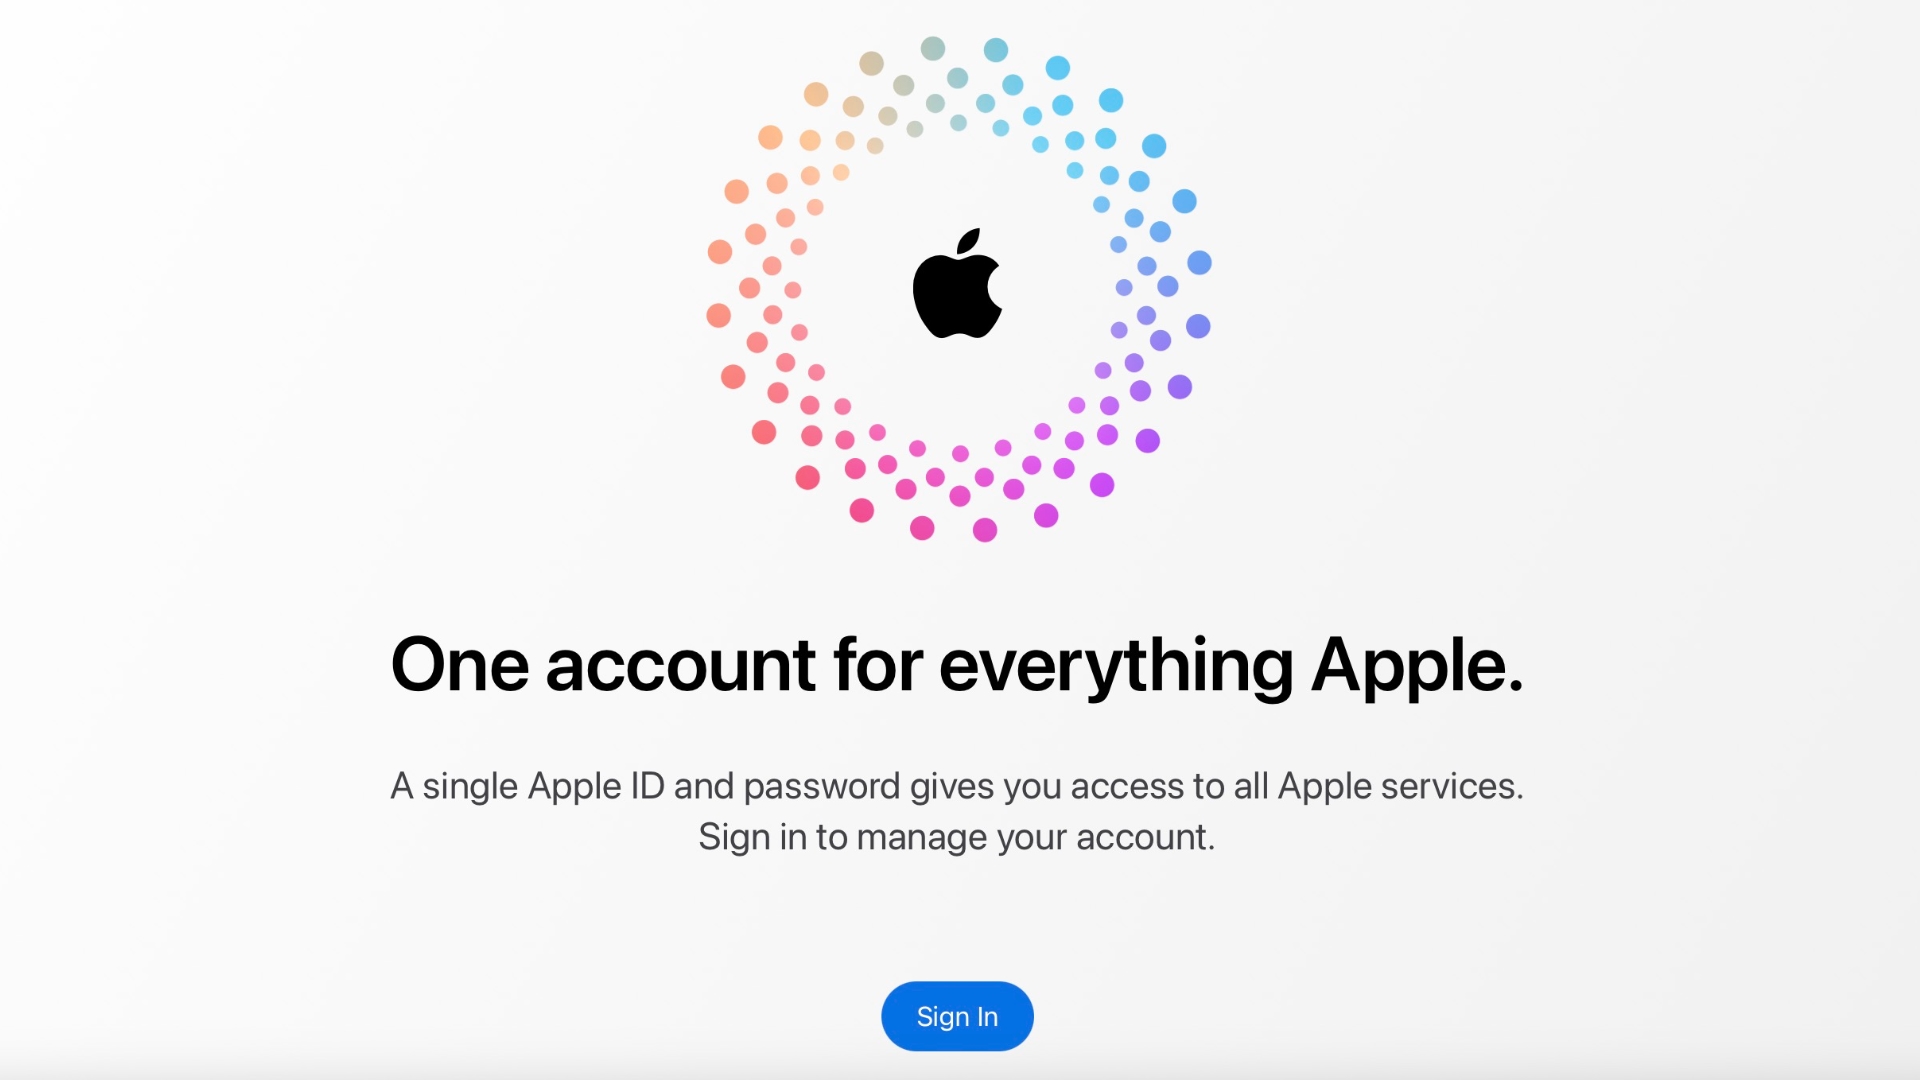 Apple ID Accounts Logging Out Users and Prompting Password Reset